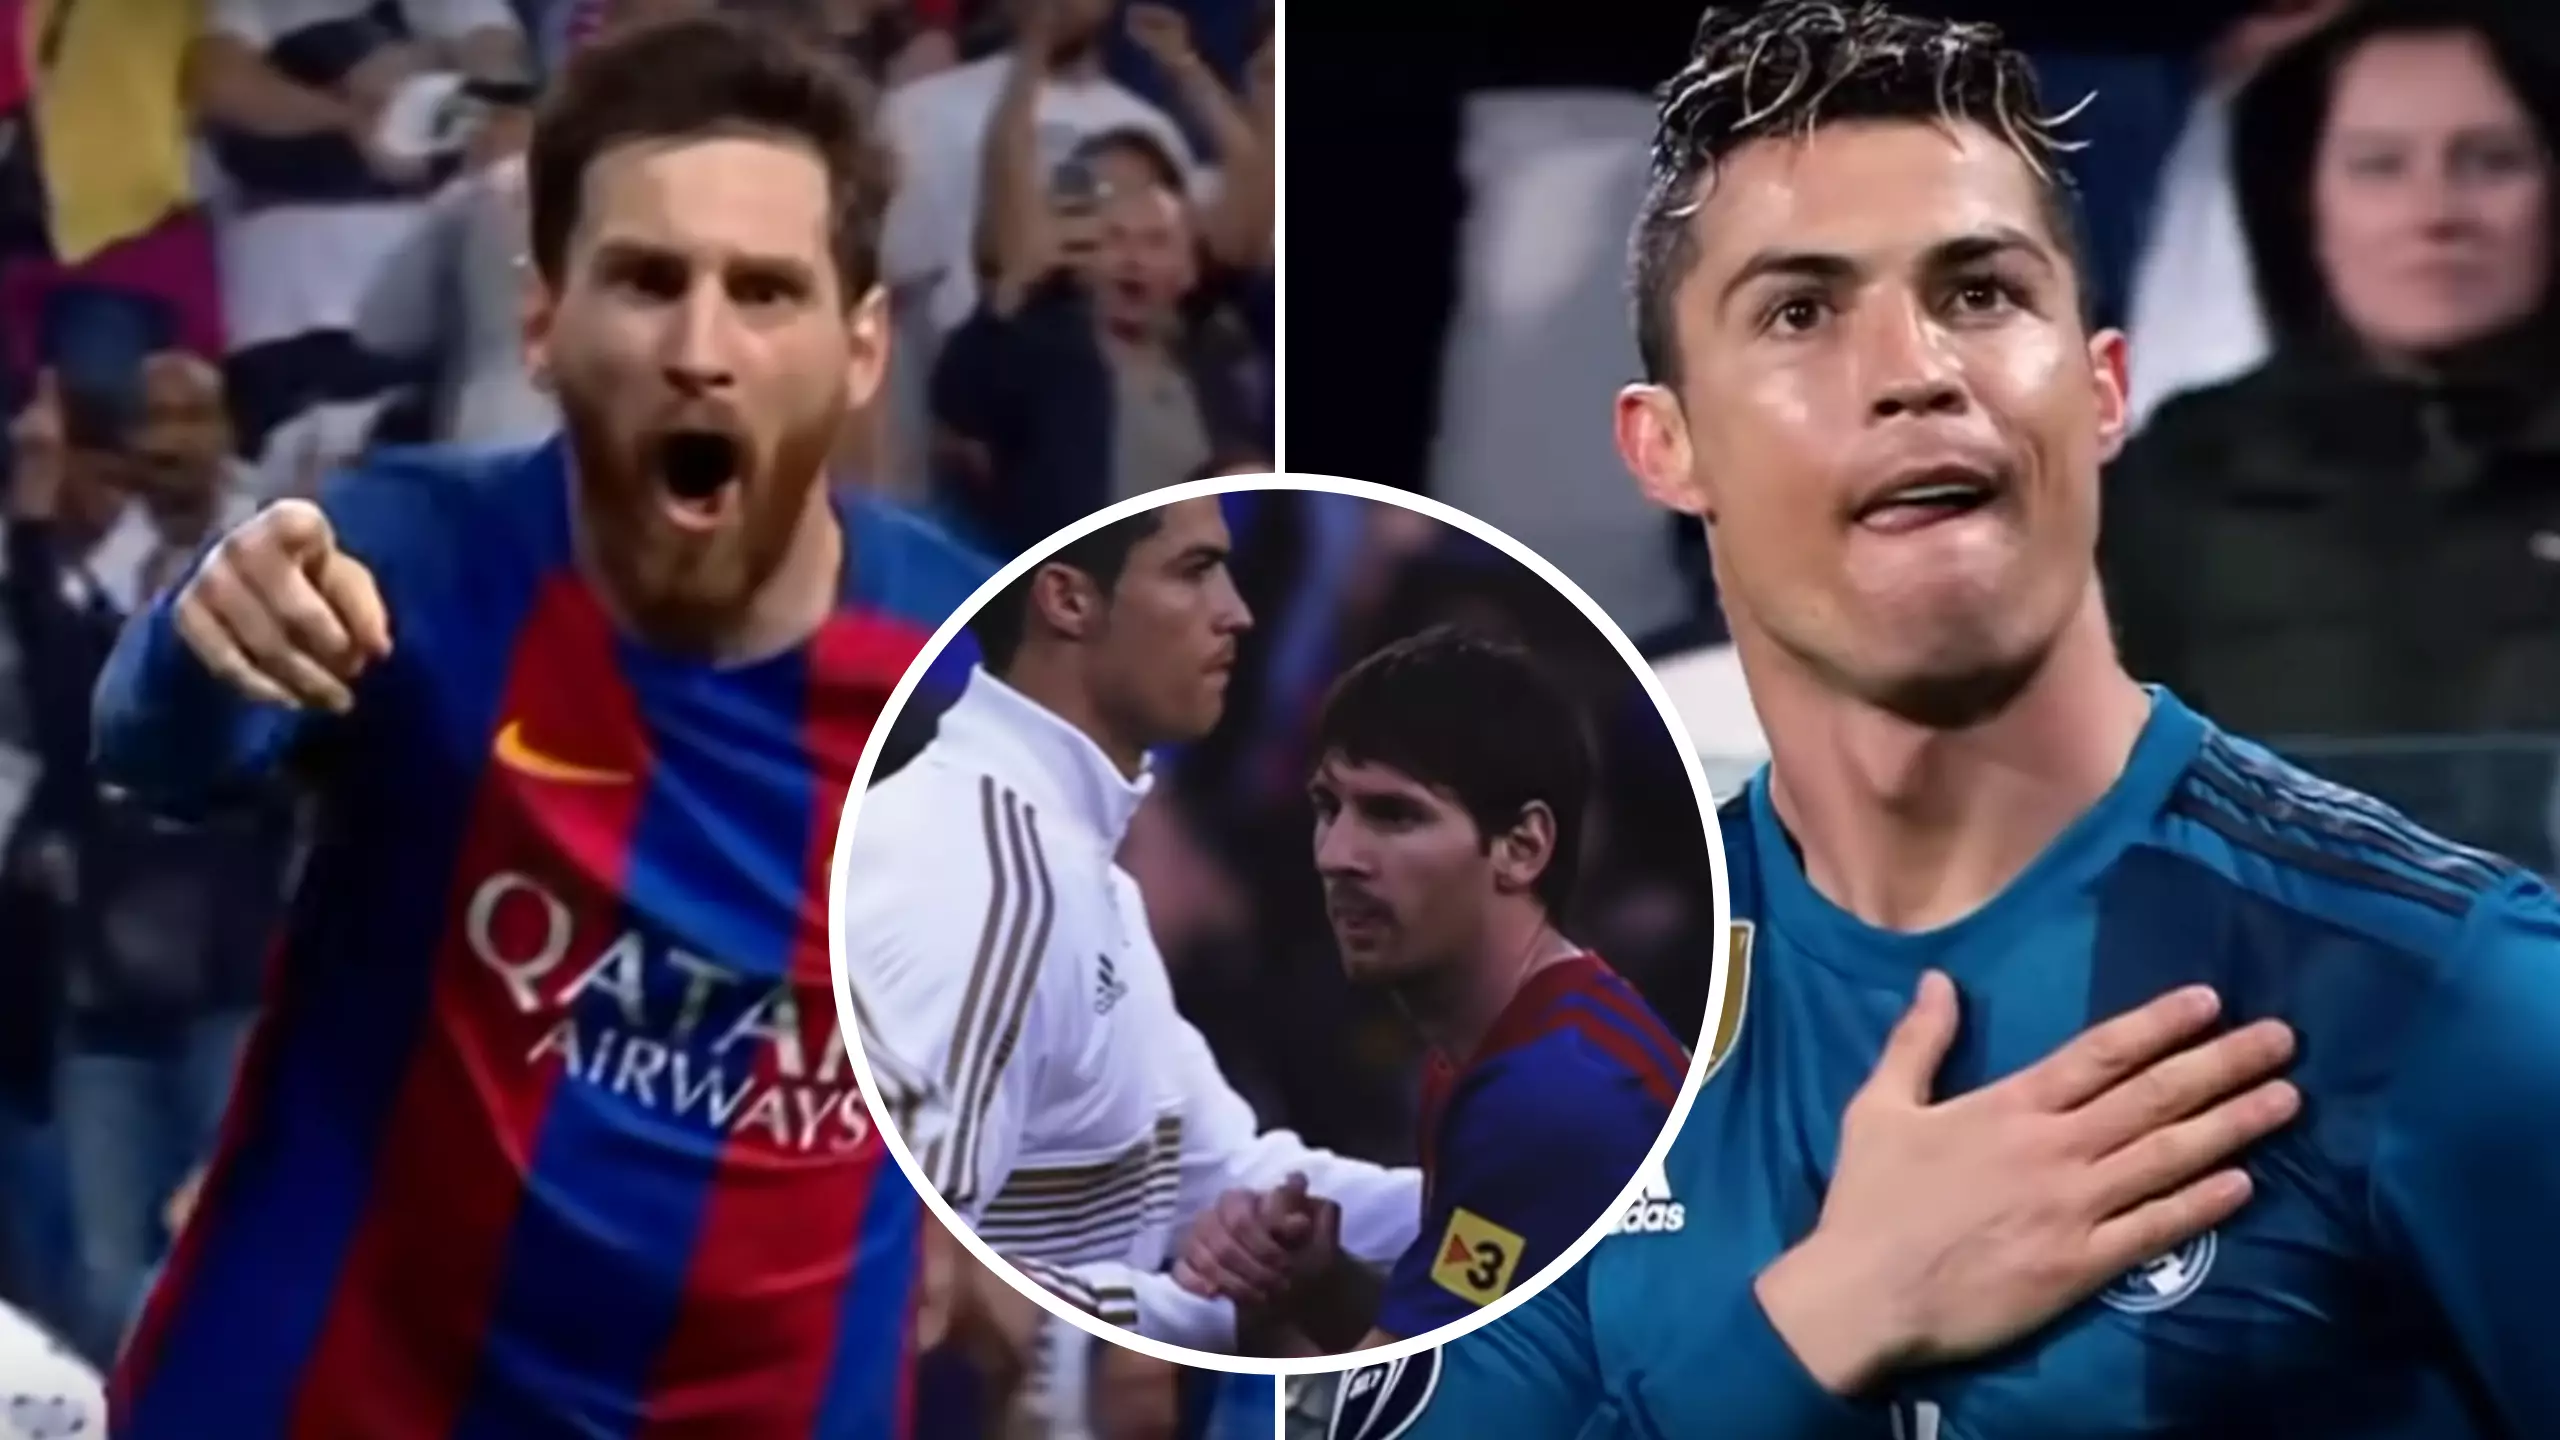 Incredible Video Comparing Cristiano Ronaldo And Lionel Messi Goes Viral